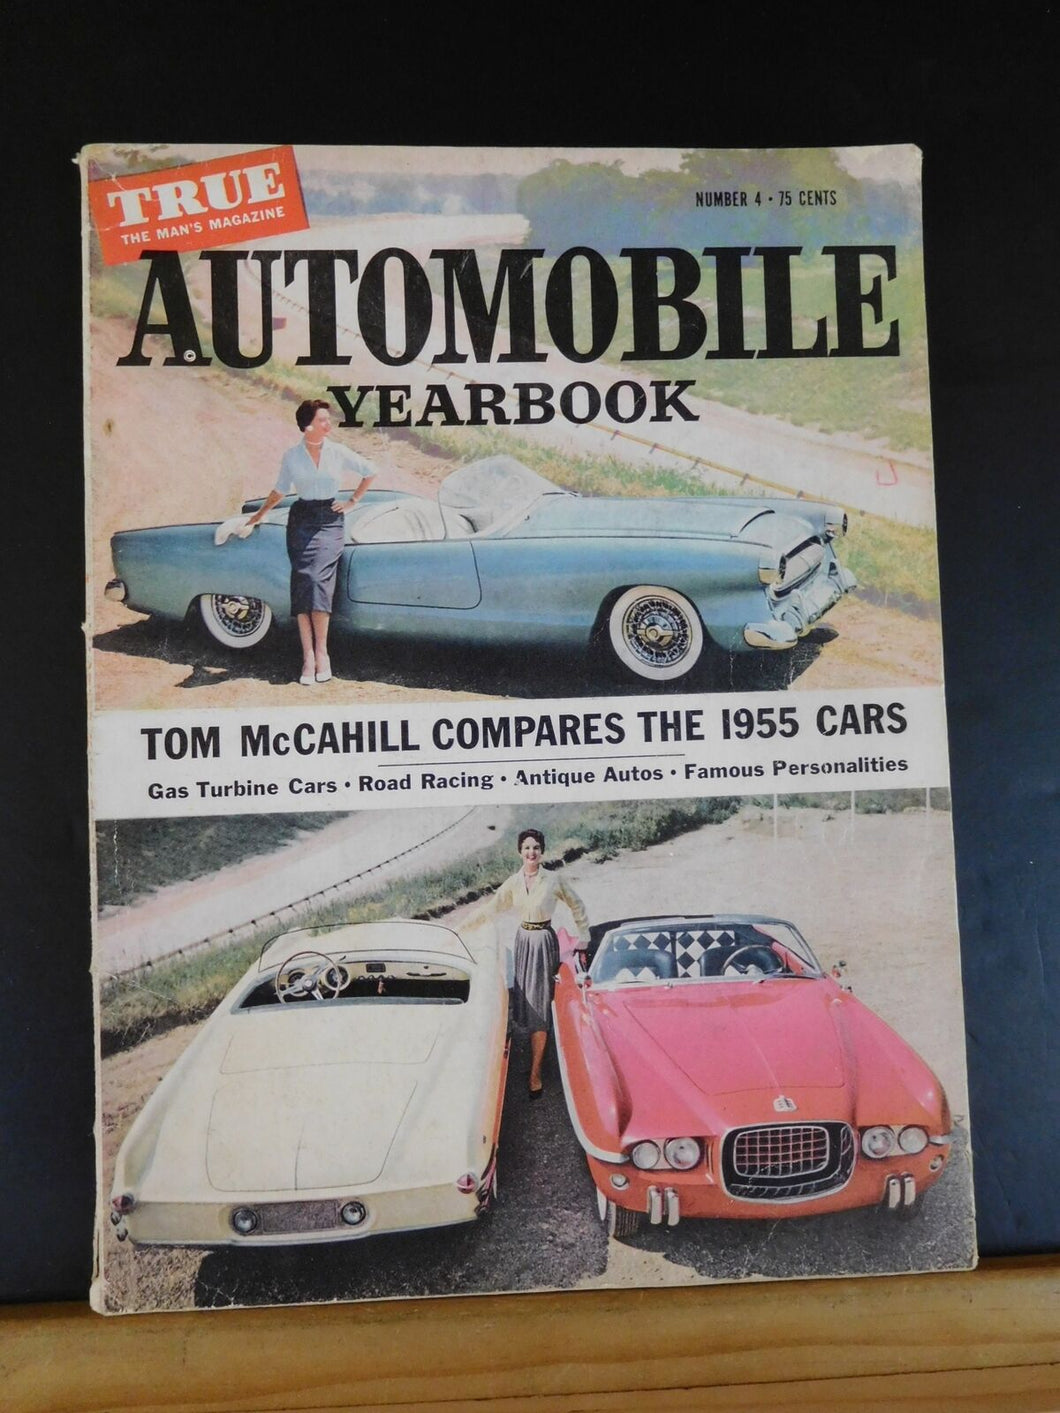 Automobile Yearbook #4 True The Man's Magazine 1955 issue